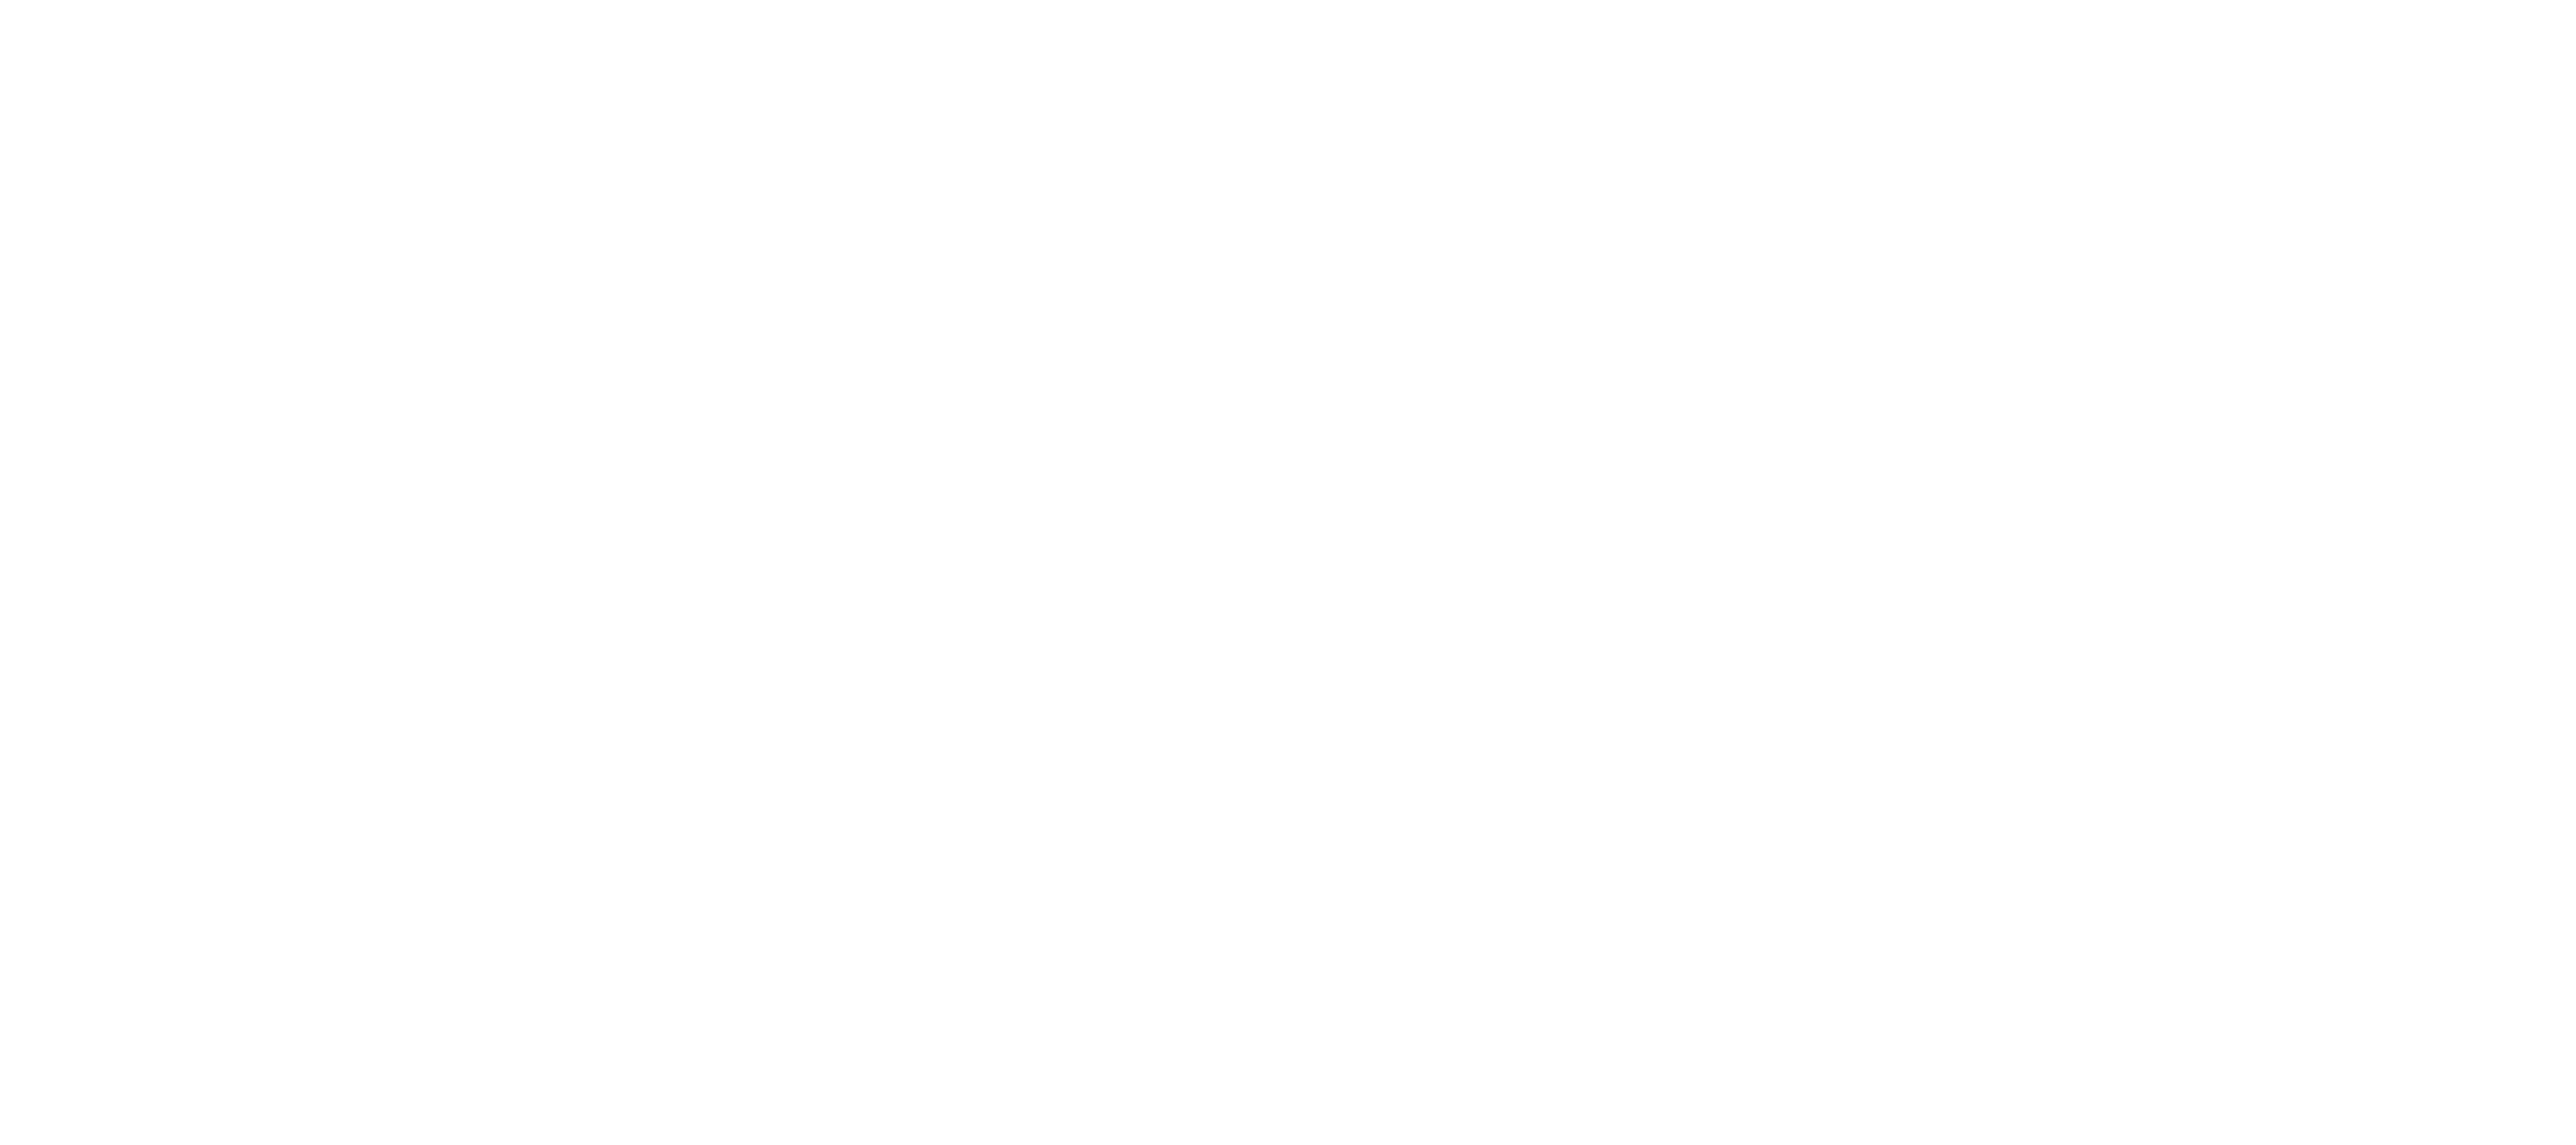 Association for the Promotion of Tourism to Africa -White